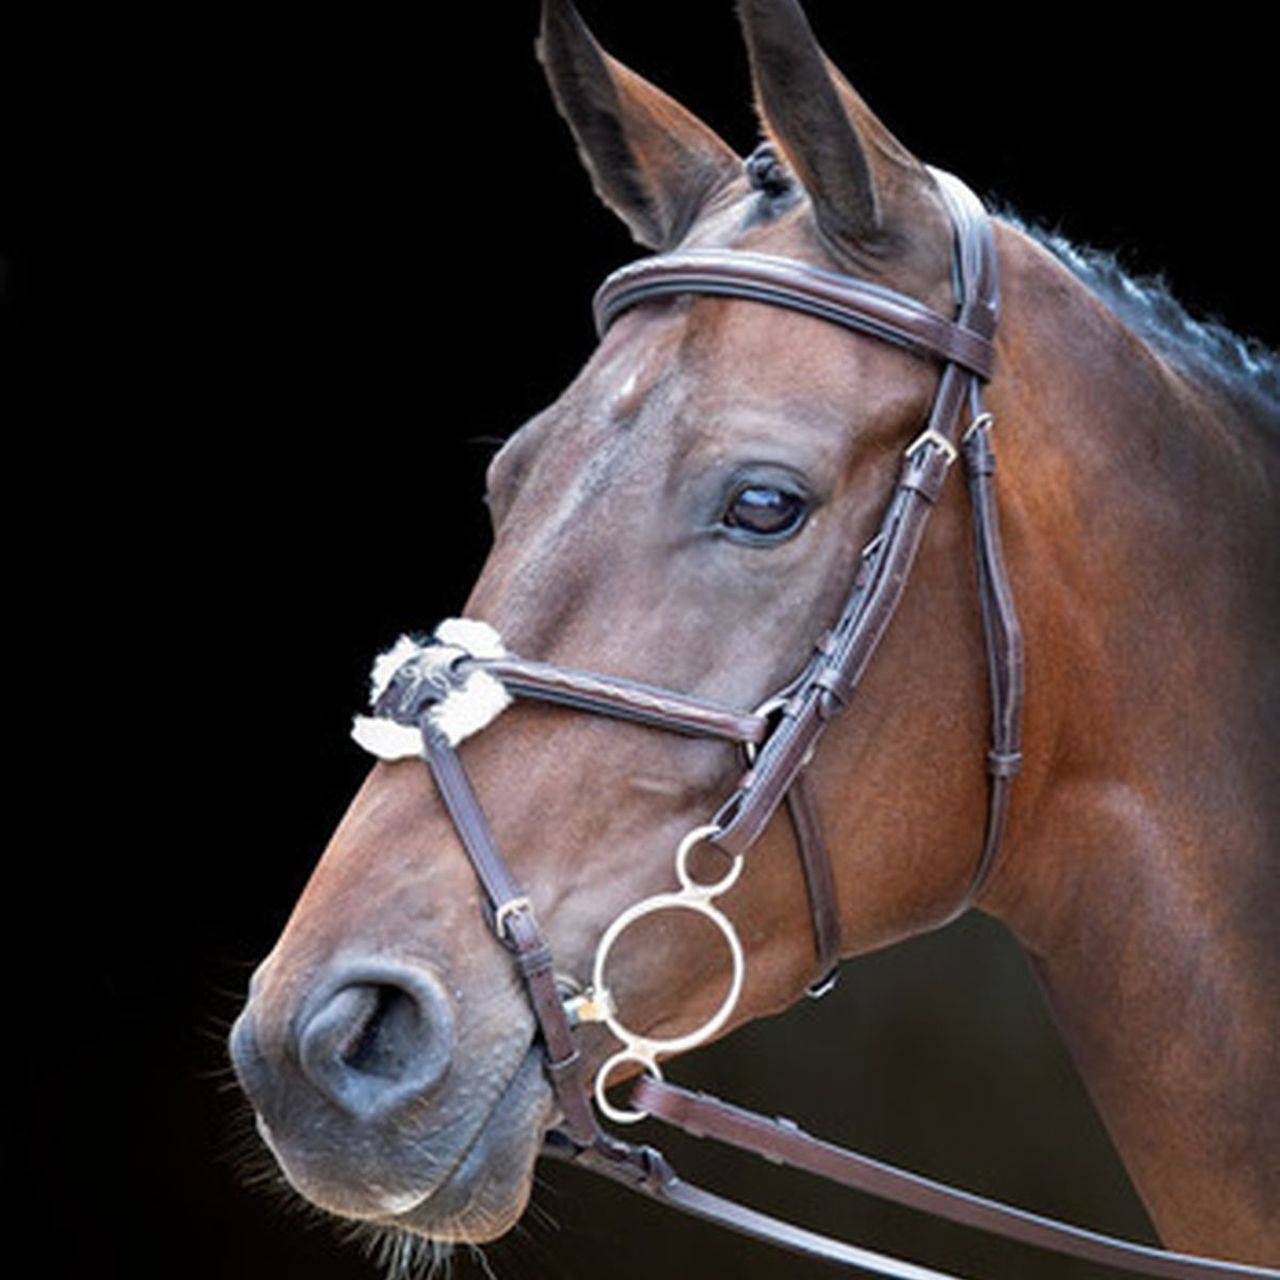 Small Pony Shires Aviemore Plain Bridle With Rubber Grip Reins Havana